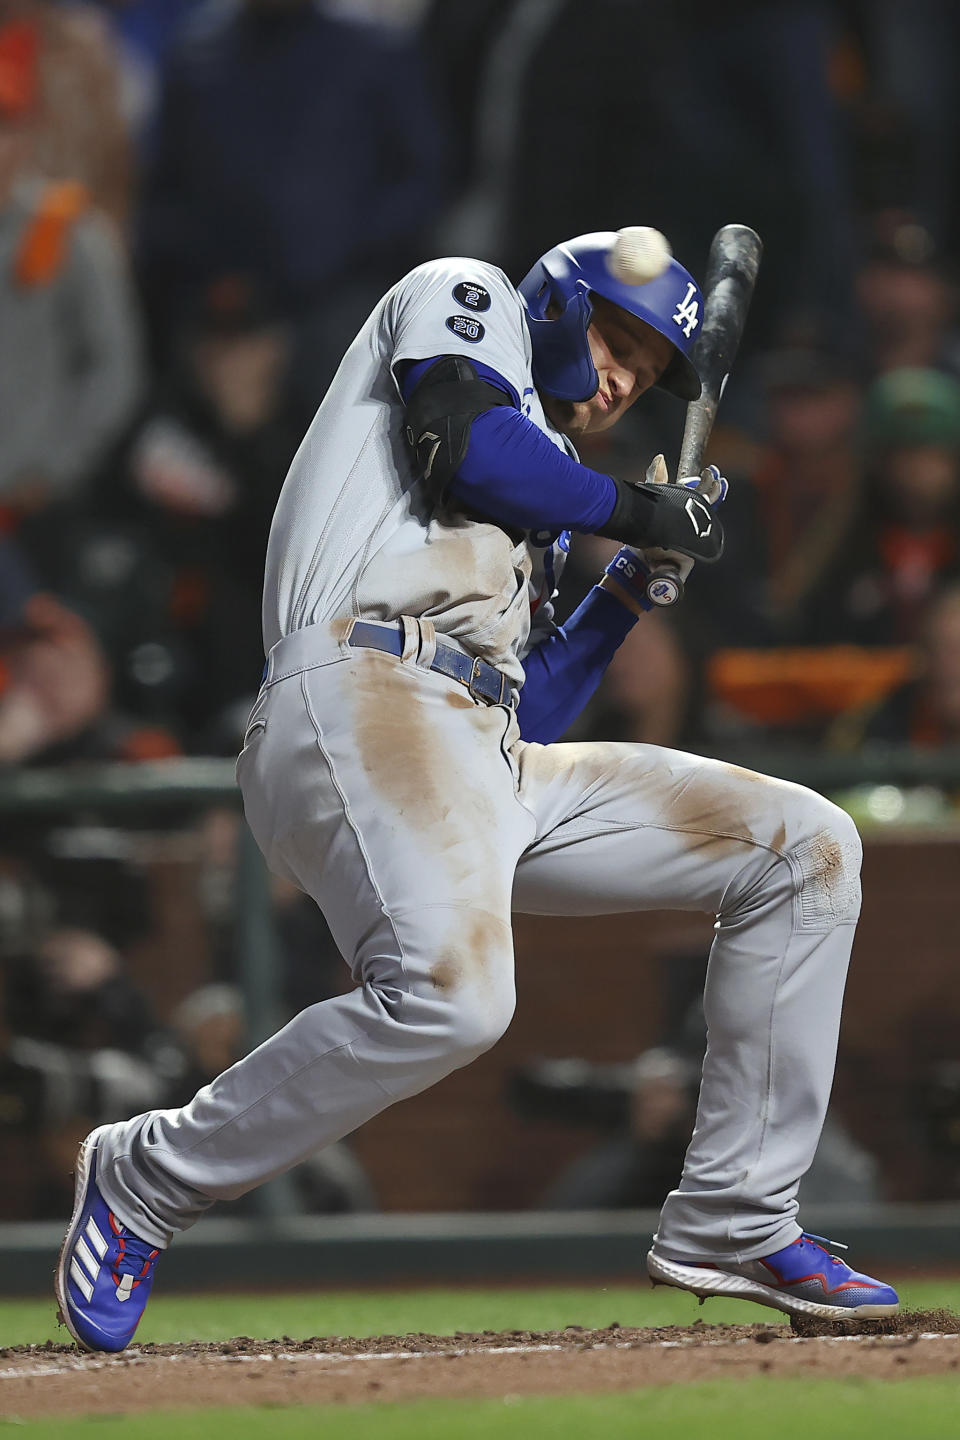 Los Angeles Dodgers' Corey Seager moves out of the way of a pitch from San Francisco Giants' Tyler Rogers during the eighth inning of Game 5 of a baseball National League Division Series Thursday, Oct. 14, 2021, in San Francisco. (AP Photo/John Hefti)